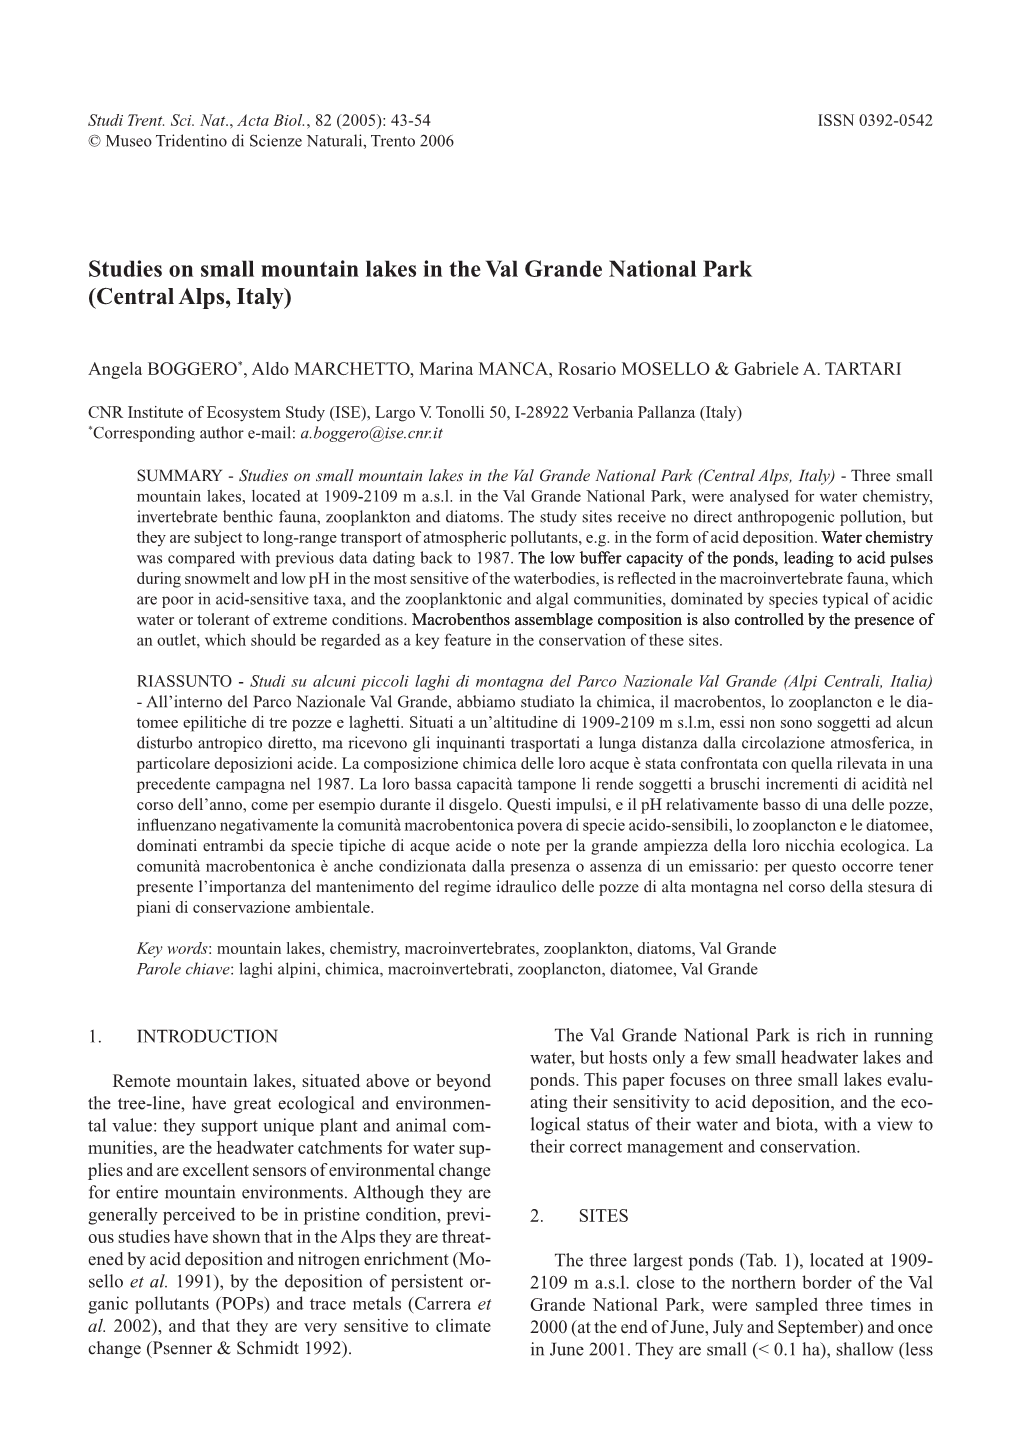 Studies on Small Mountain Lakes in the Val Grande National Park (Central Alps, Italy)